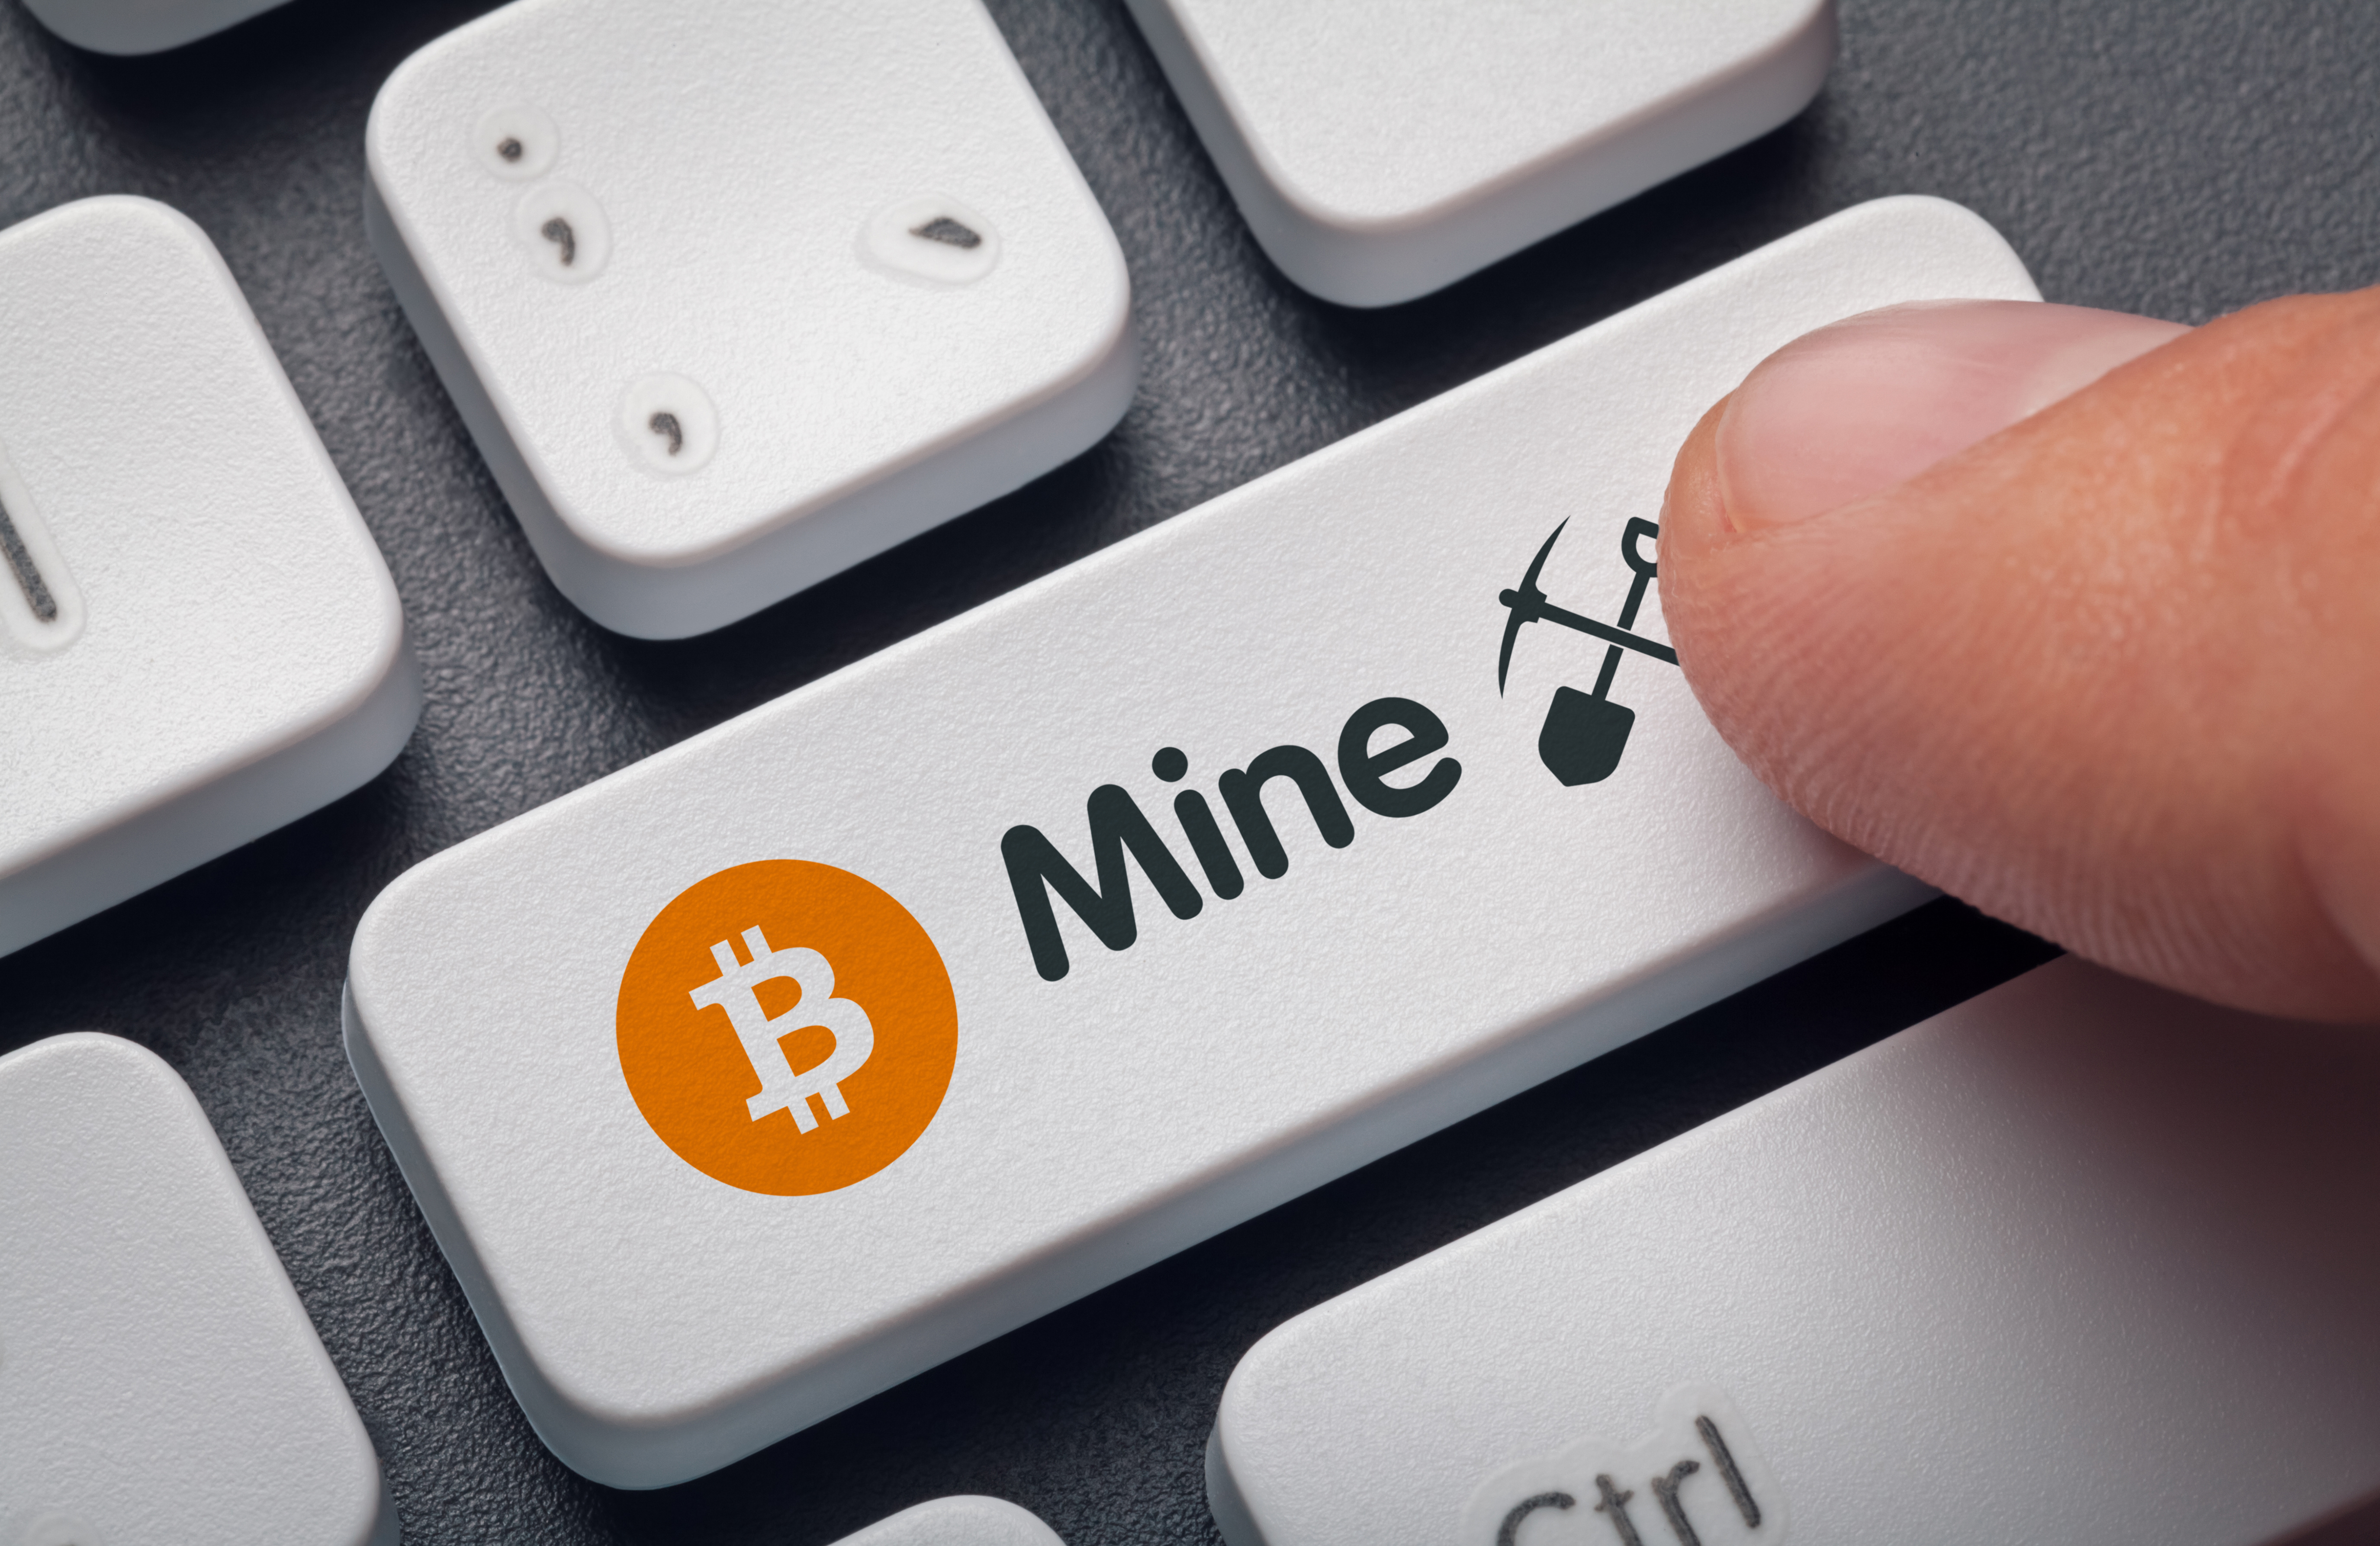 A person&amp;rsquo;s finger presses a computer keyboard key. The key is decorated with a symbol that represents Bitcoin, as well as the word &amp;ldquo;mine&amp;rdquo; and drawings of a pick and shovel.